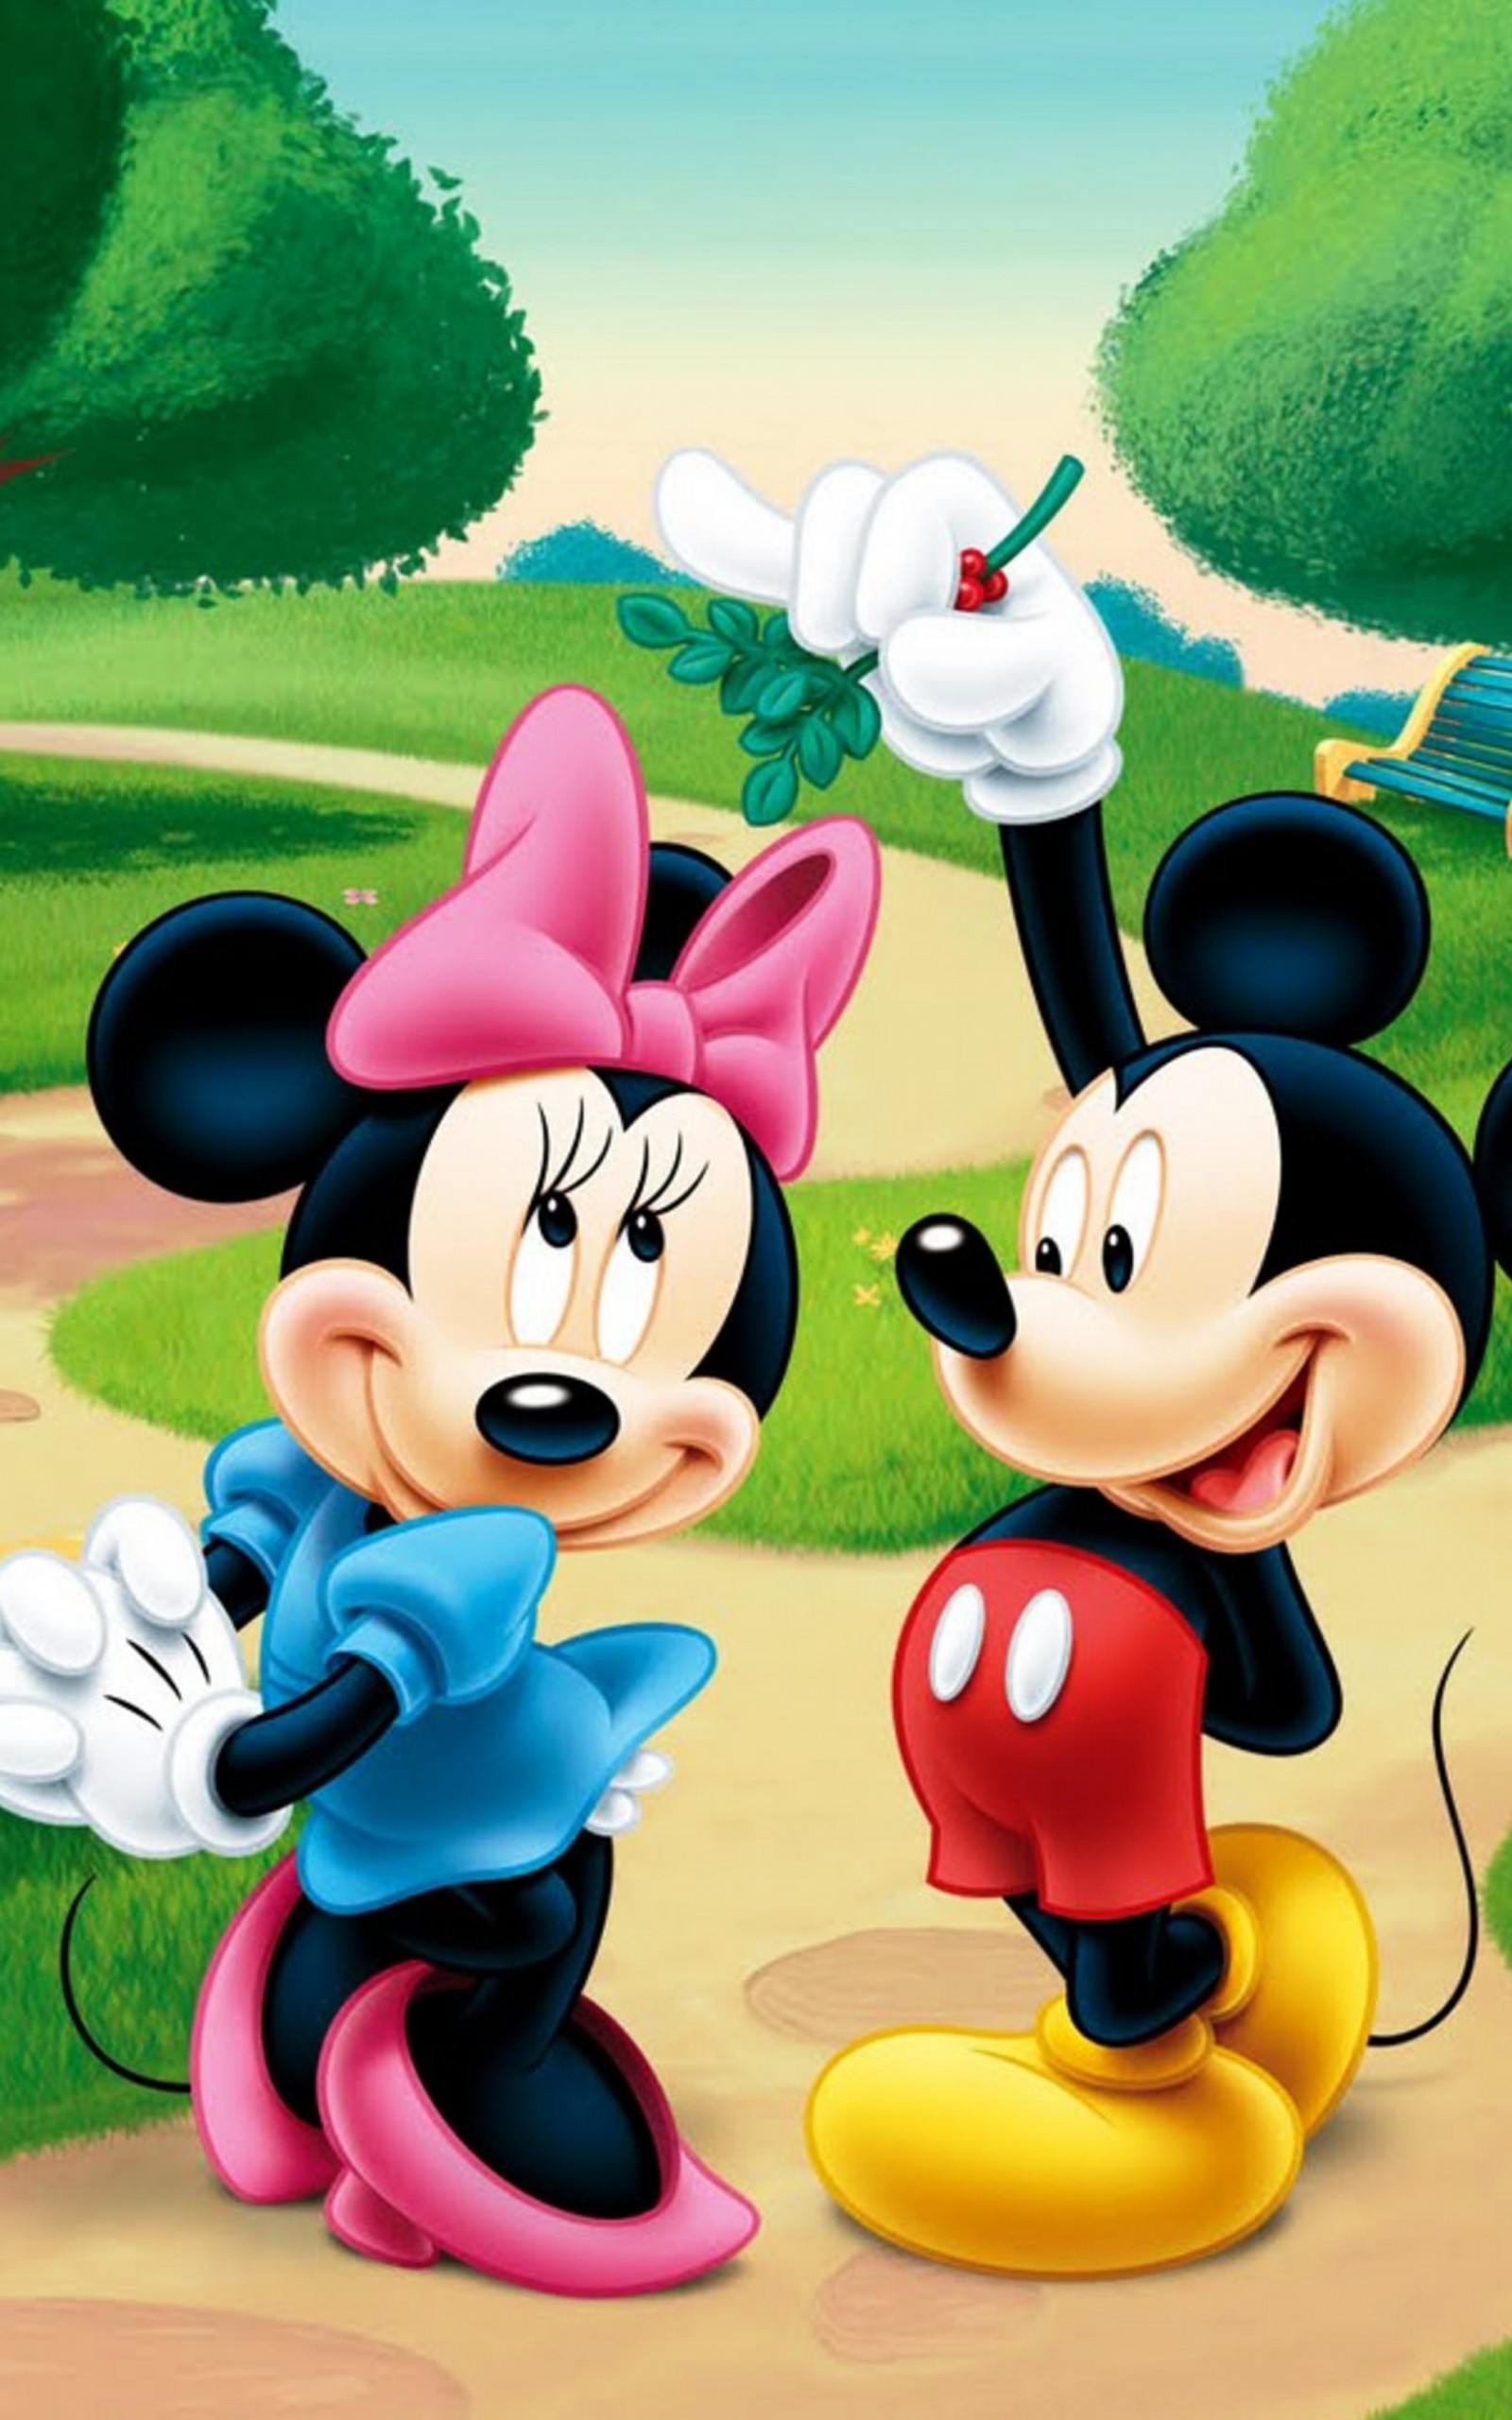 Cute Mickey Mouse Images